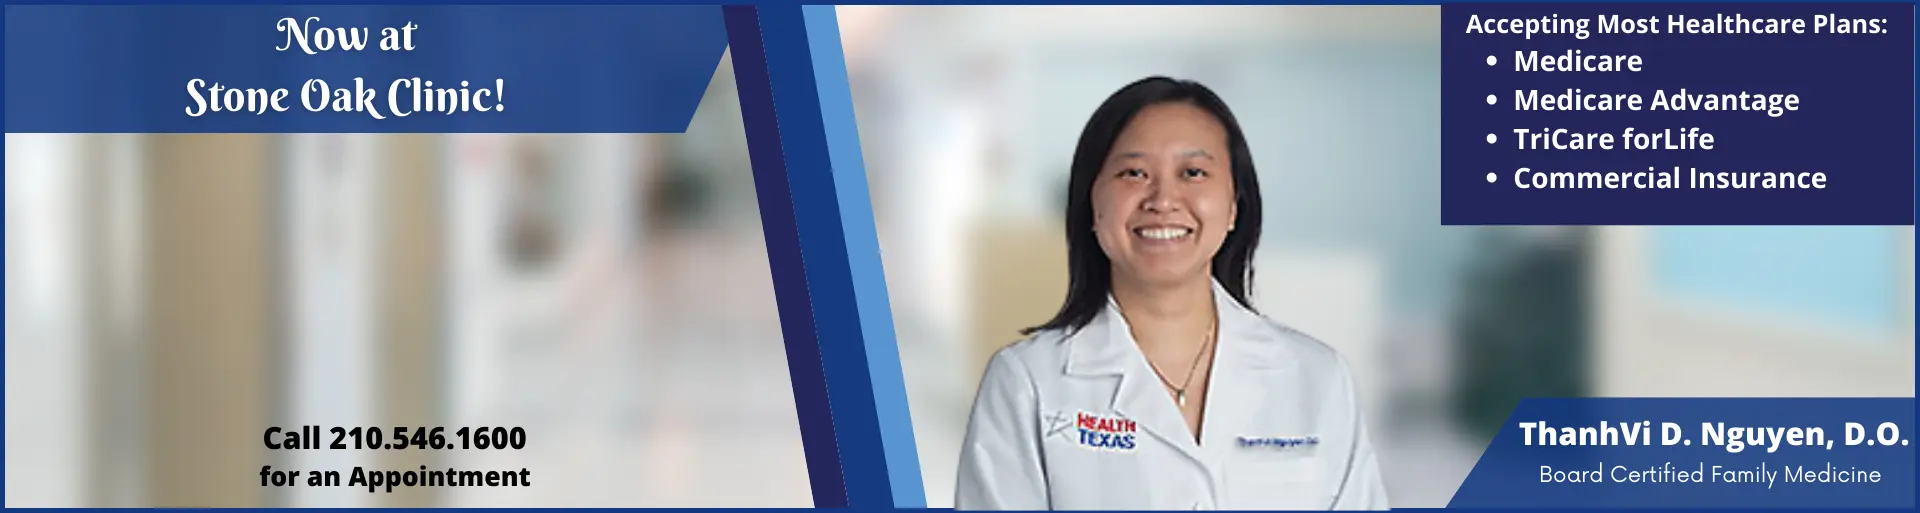 Welcoming Dr. Nguyen to HealthTexas Medical Group